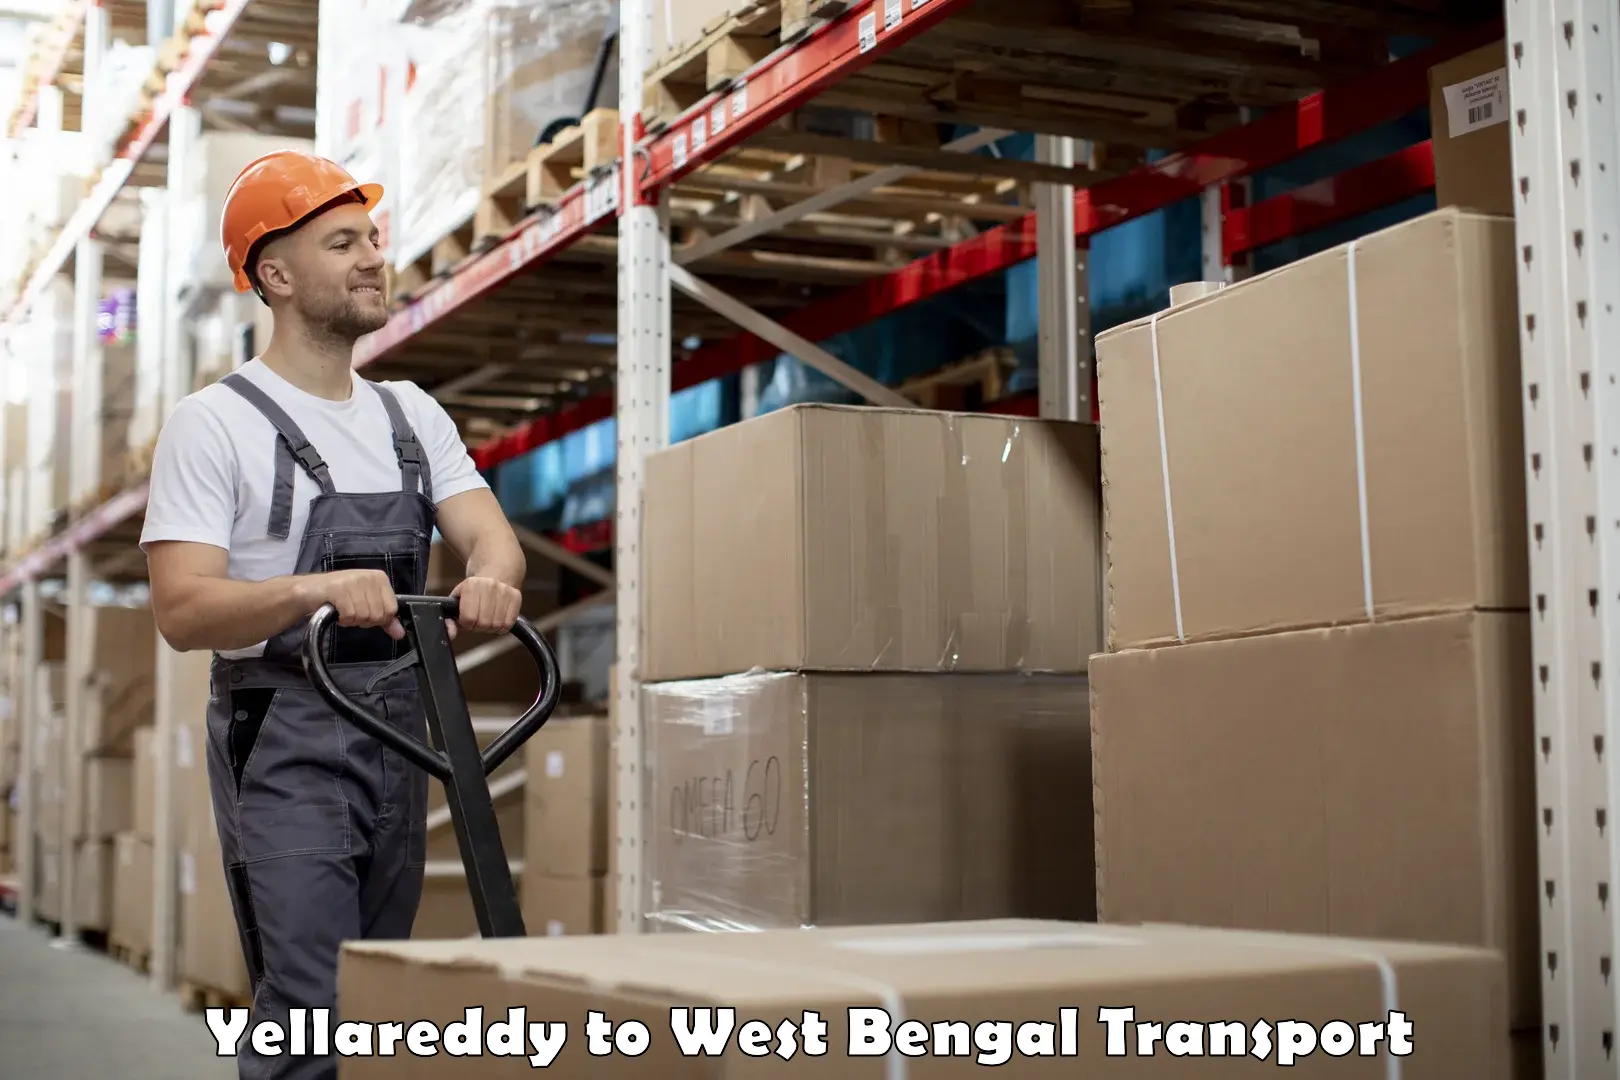 Goods delivery service Yellareddy to Barrackpore